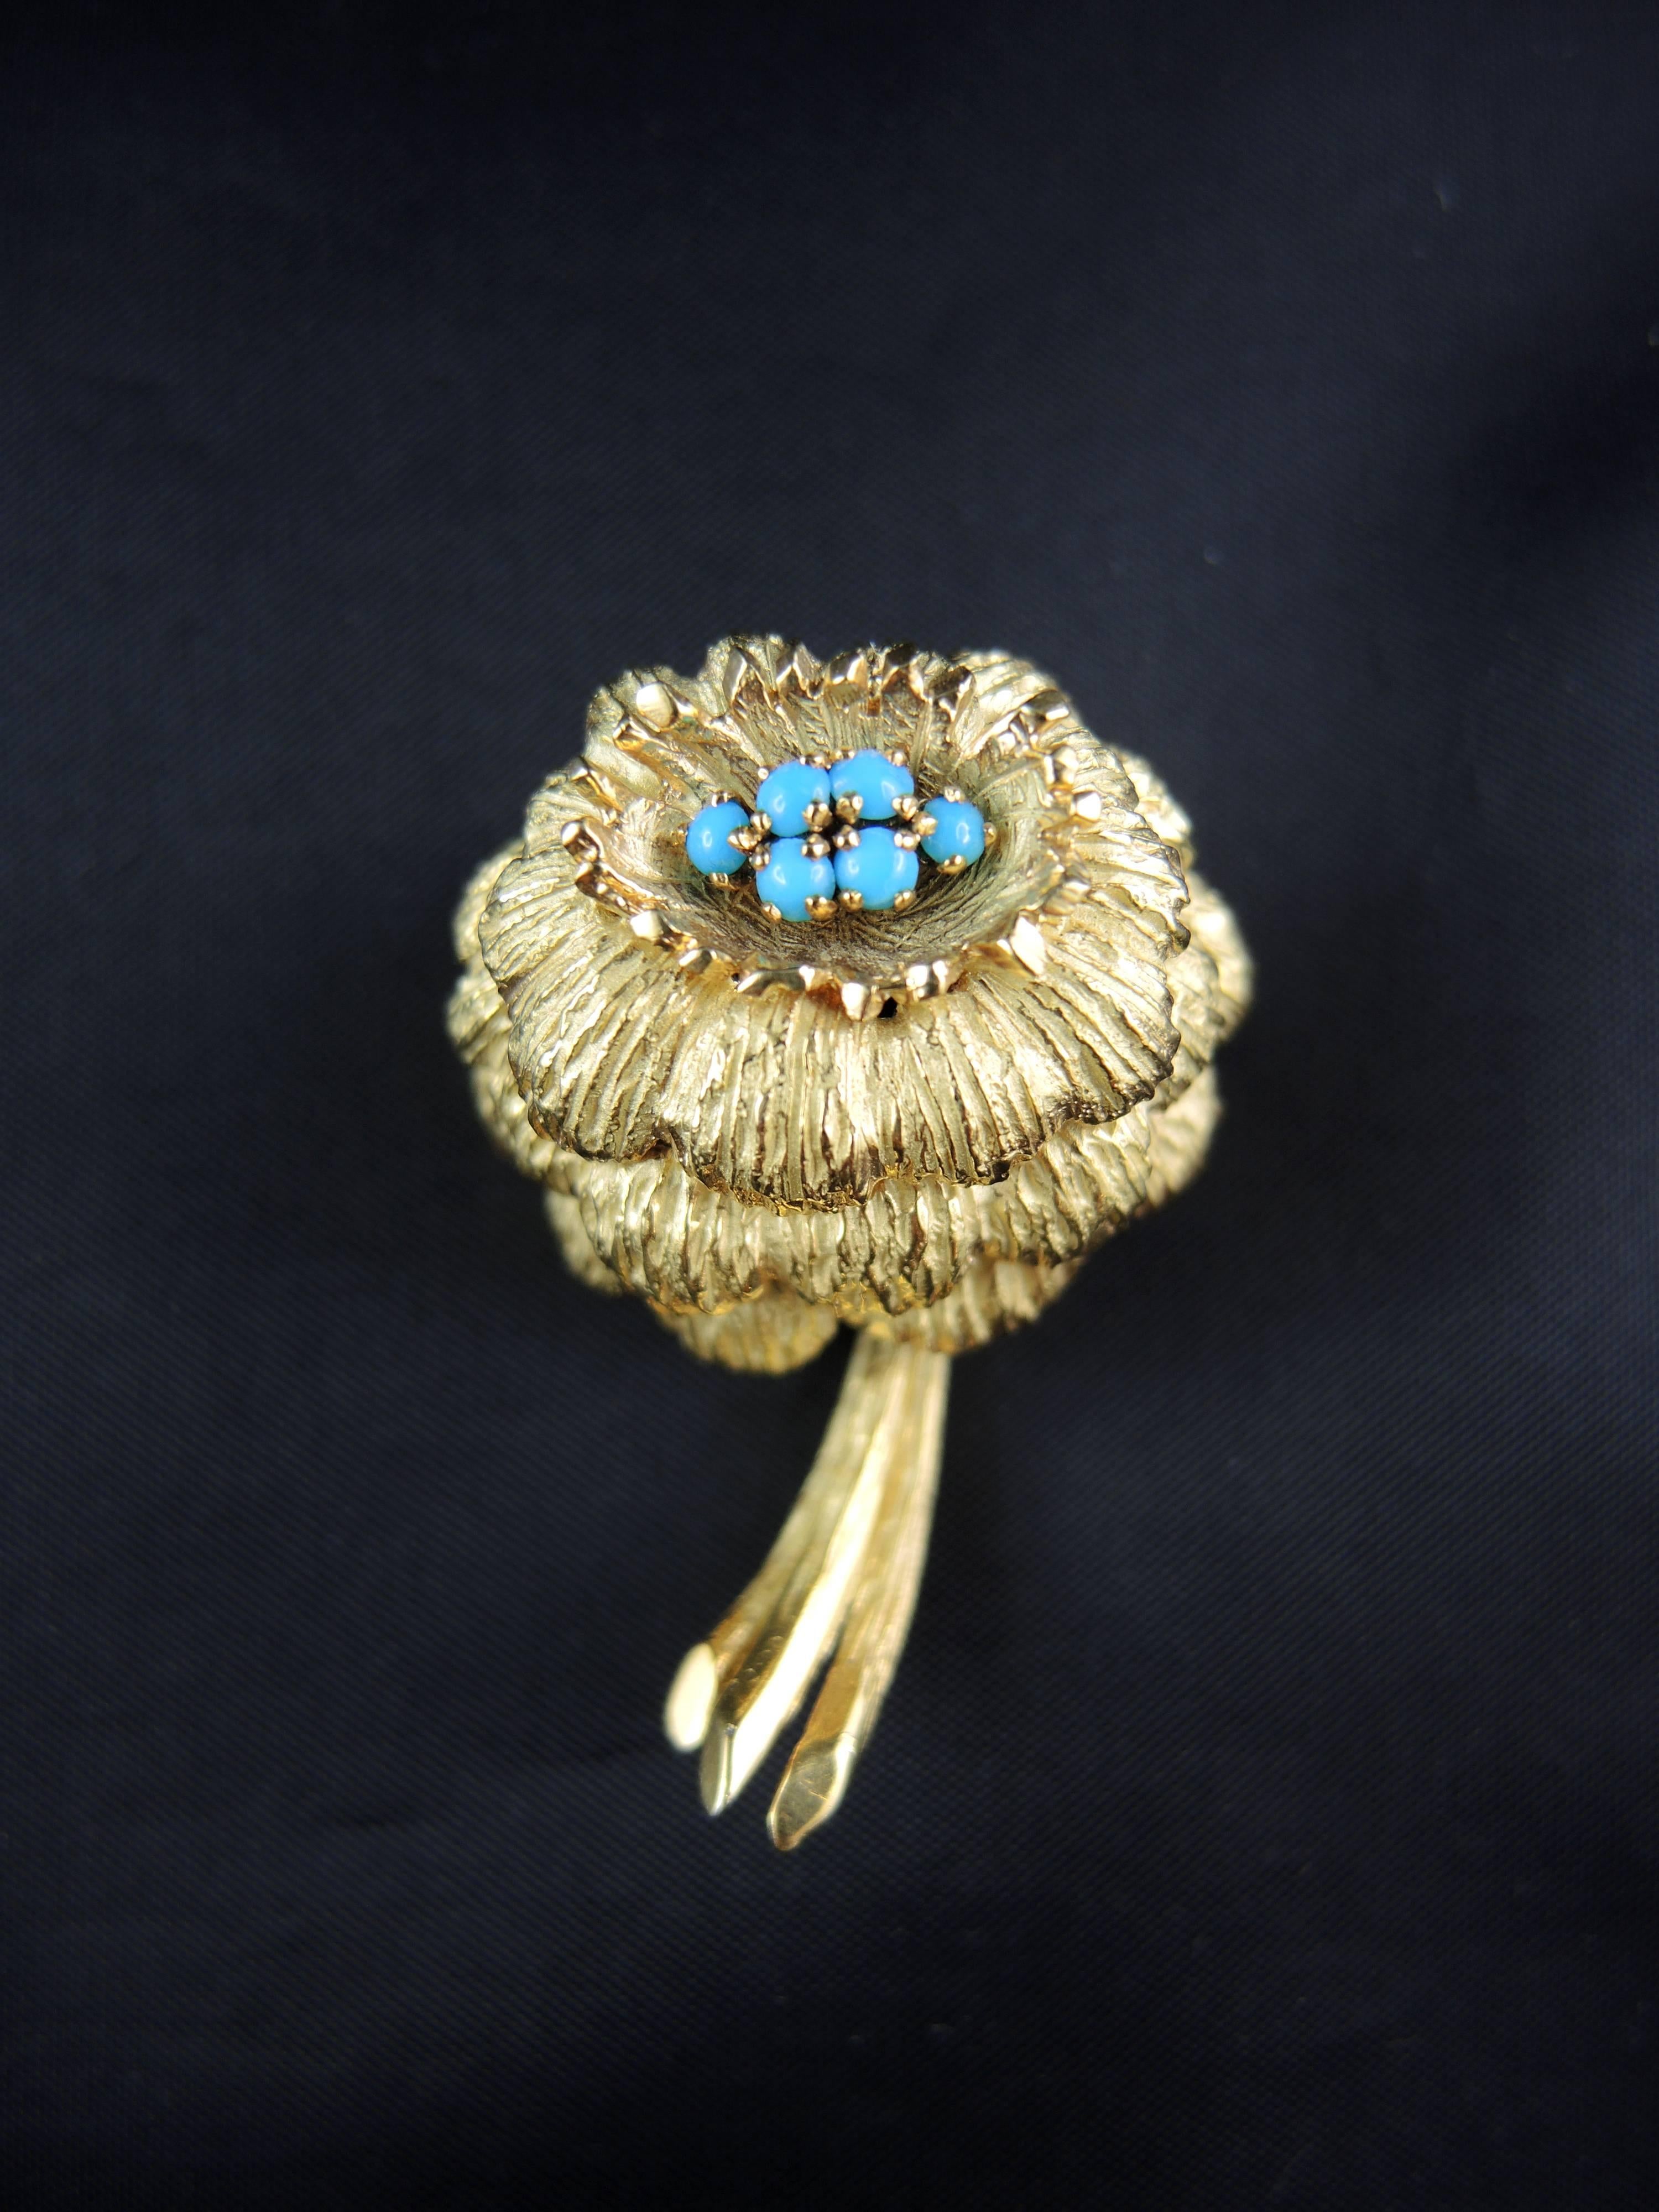 Glamourous Flower brooch made in 18 KT yellow gold (quality mark: eagle's head), set with turquoise's cabochon.

French work circa 1970, by Michèle Morgan, a famous french actress.

Height: 4.00 cm

Very little scratches on the gold parts, visible